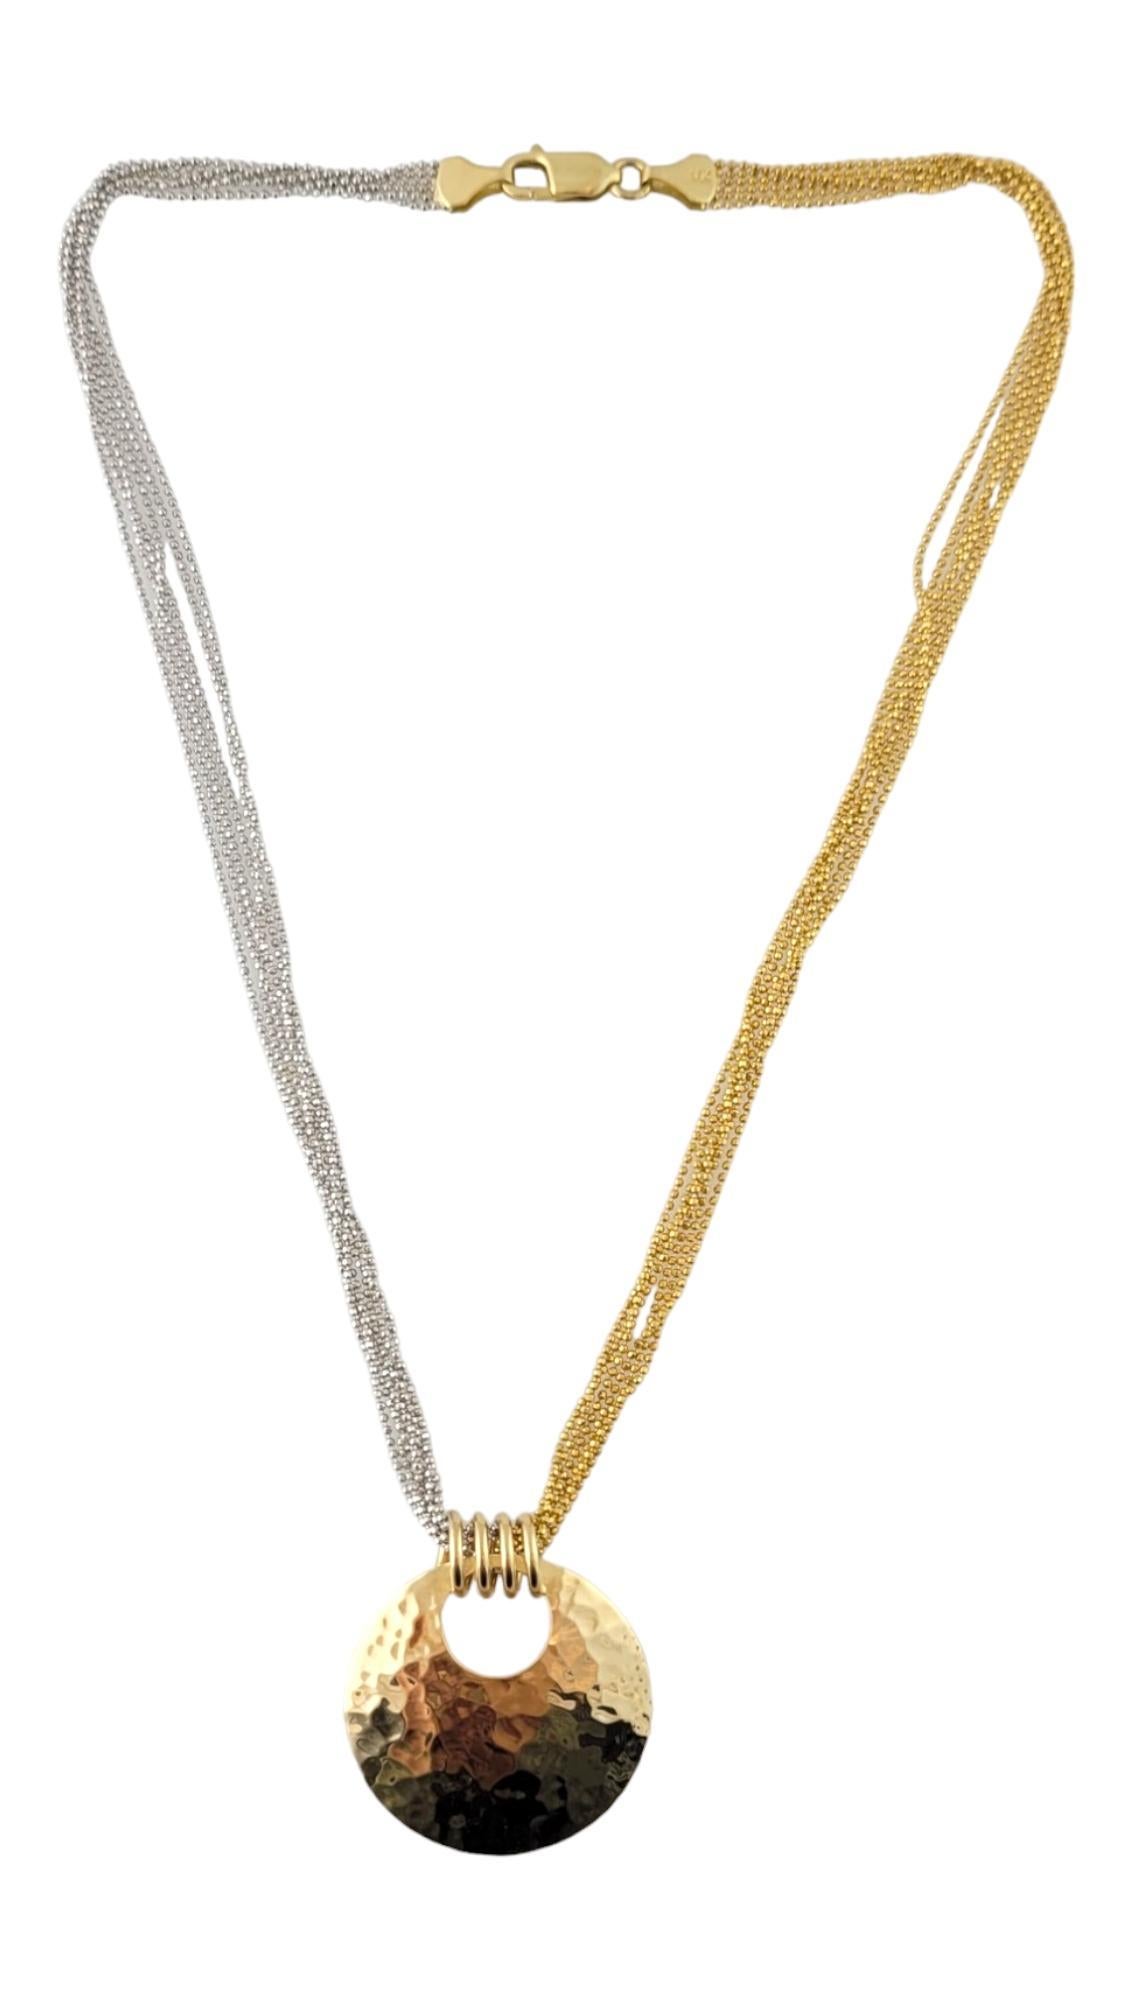 14K Yellow & White Gold Multi Chain Hammered Pendant Necklace #17341 In Good Condition For Sale In Washington Depot, CT